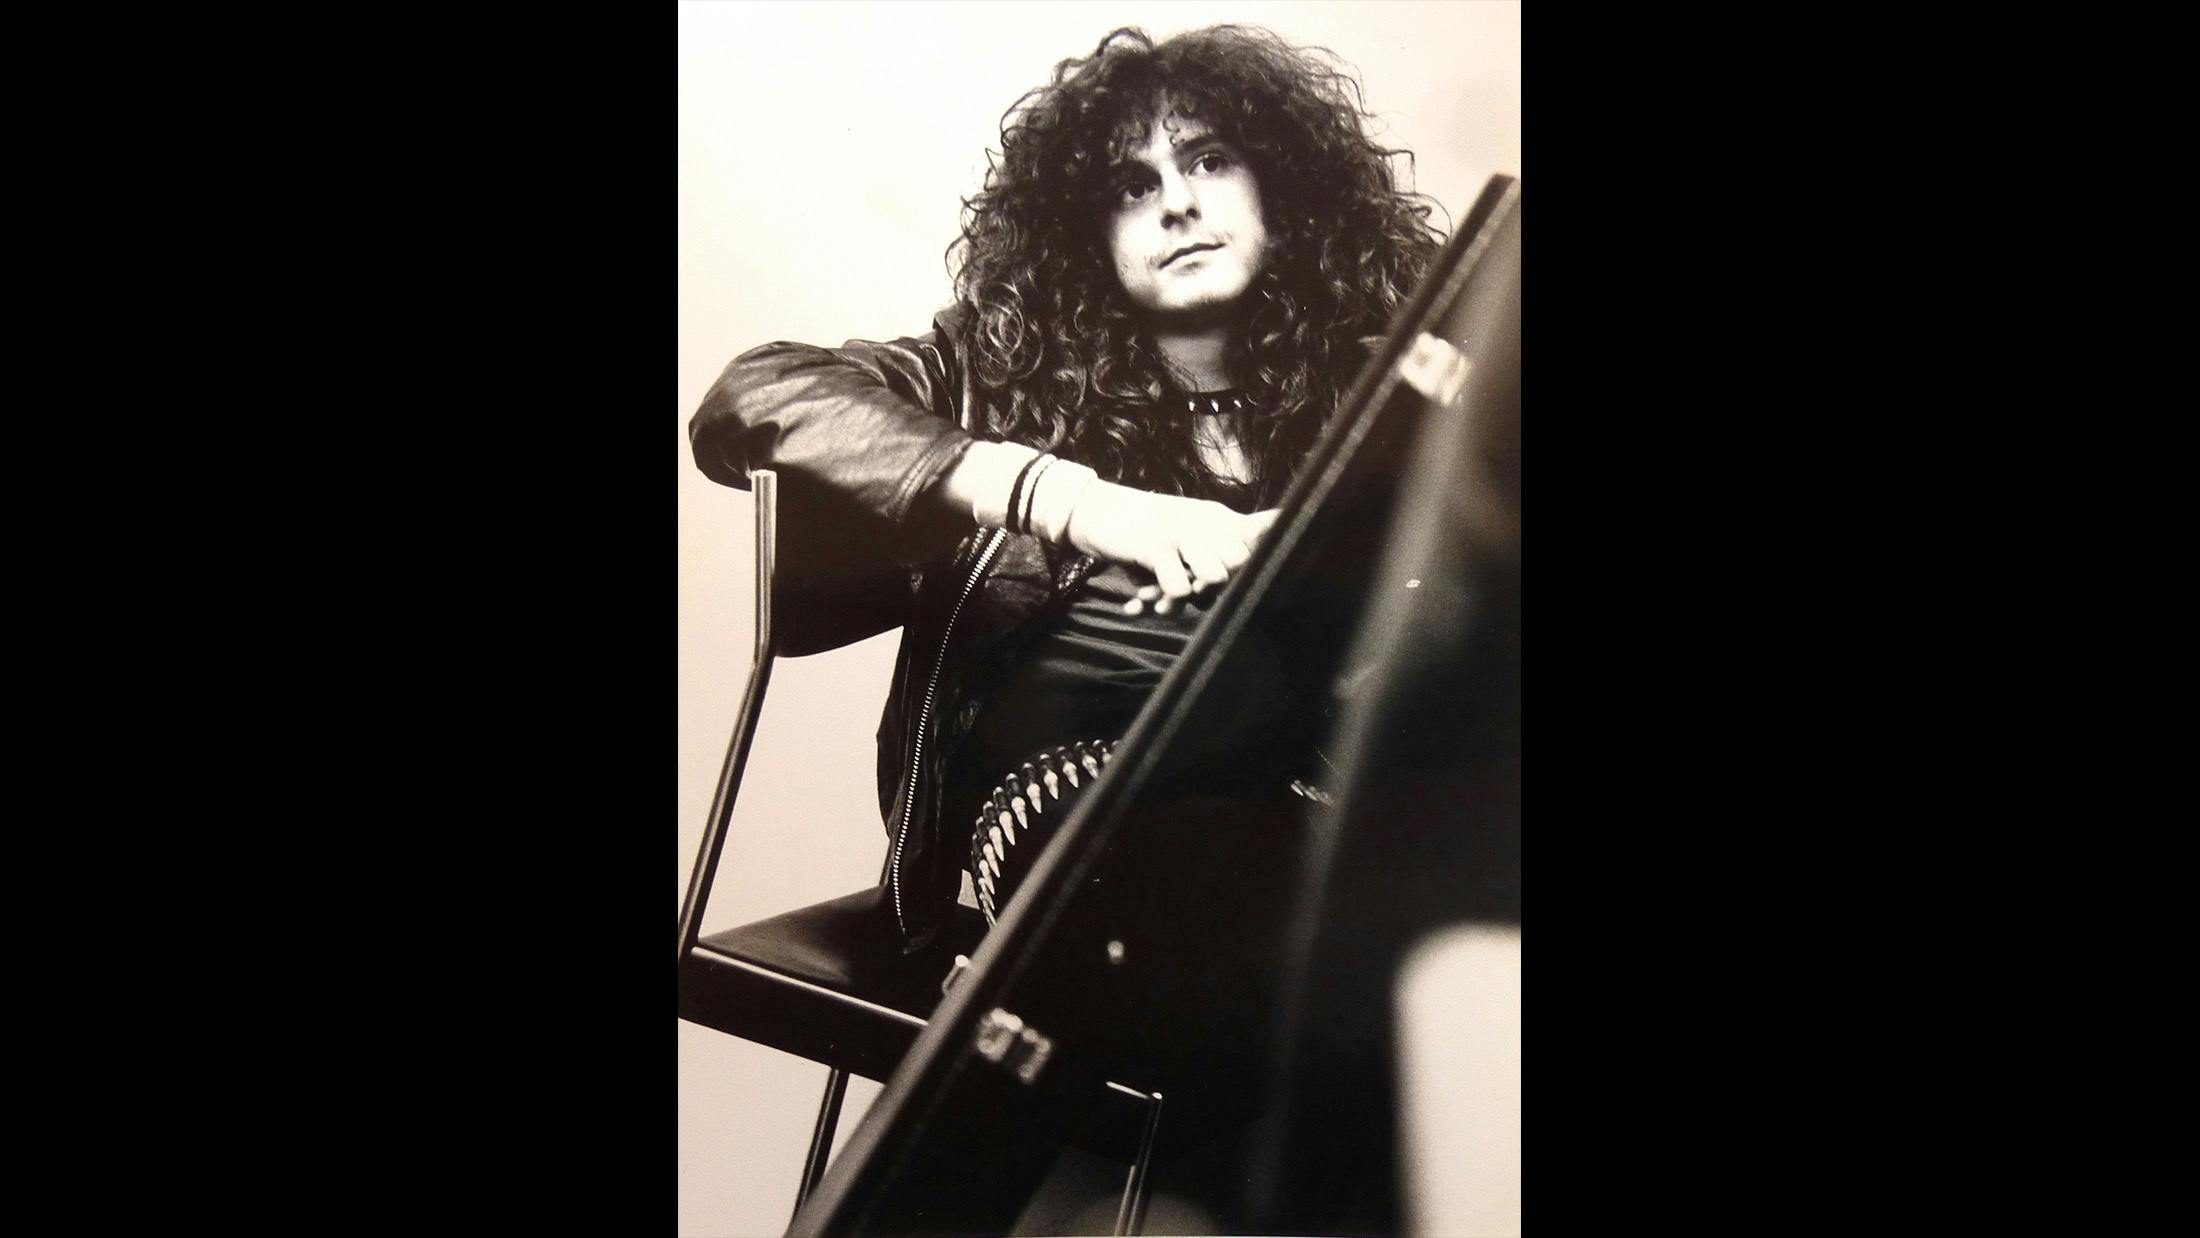 Tommy, our first drummer, relaxing during a break filming a Swiss TV show that we did with Celtic Frost in 1985. The Bestial Invasion video clip from that day became famous many years later, thanks to modern media...